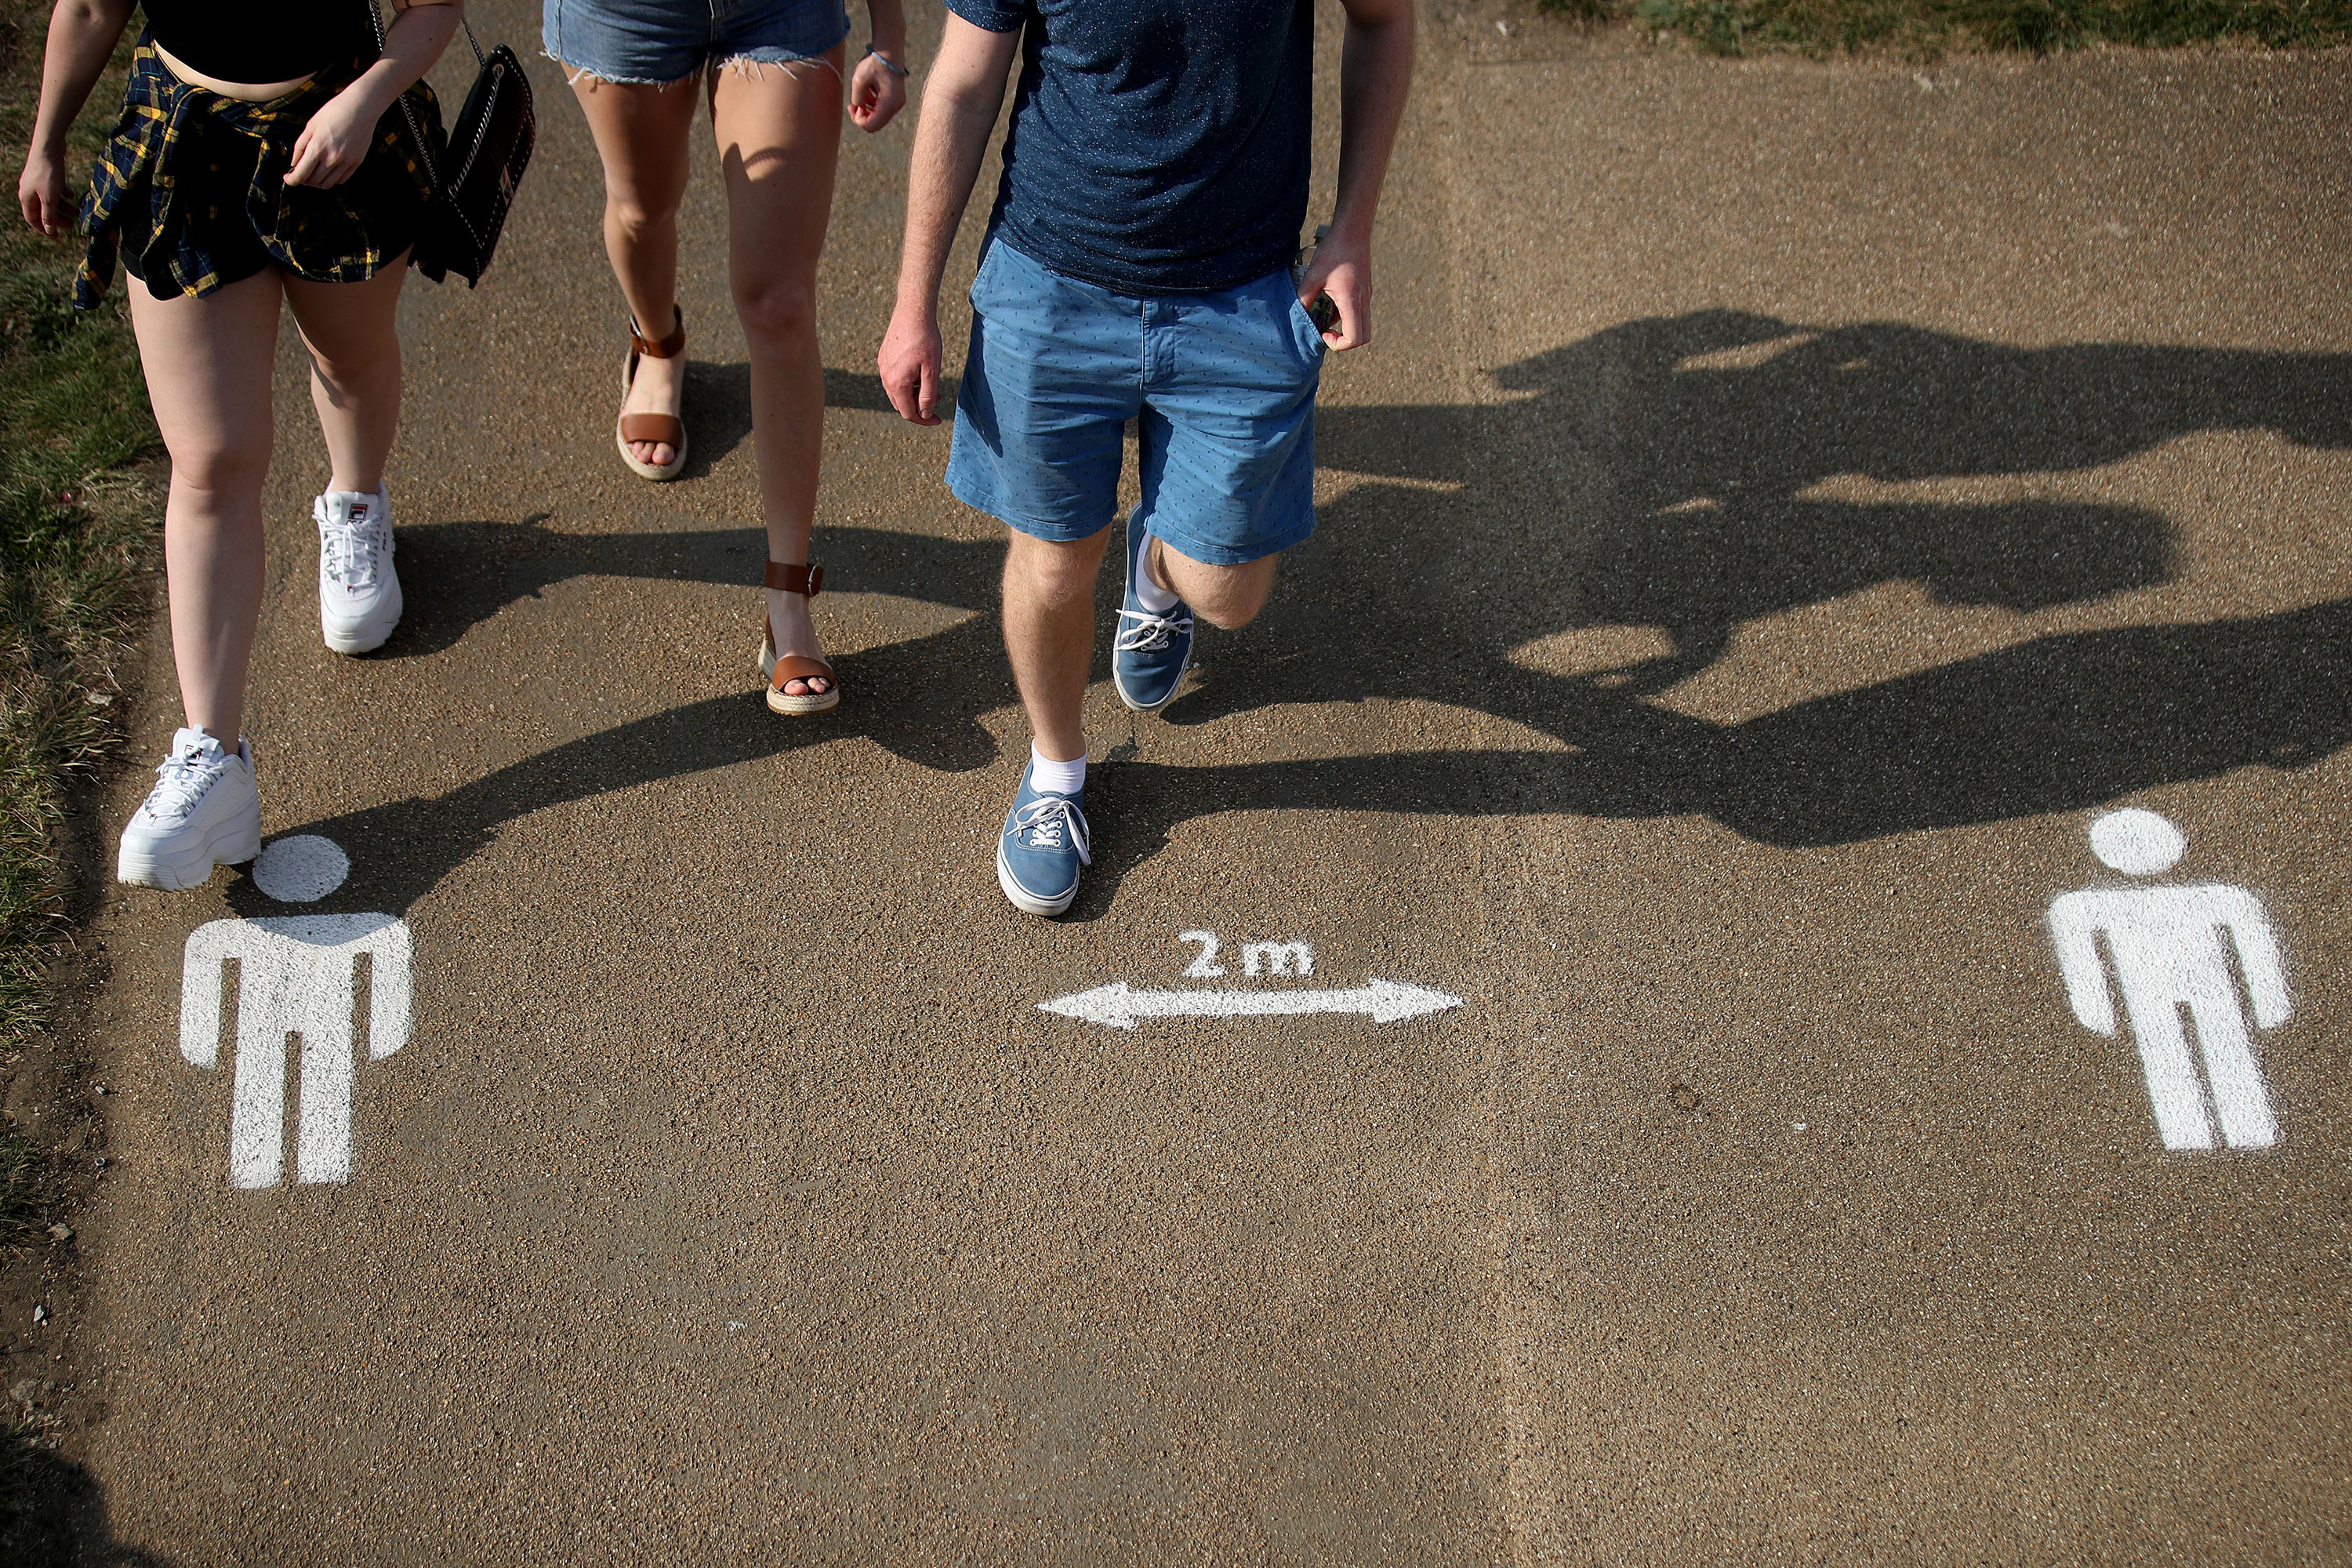 People walk past social distancing markers on the ground at Queen Elizabeth Olympic Park in London on April 11.